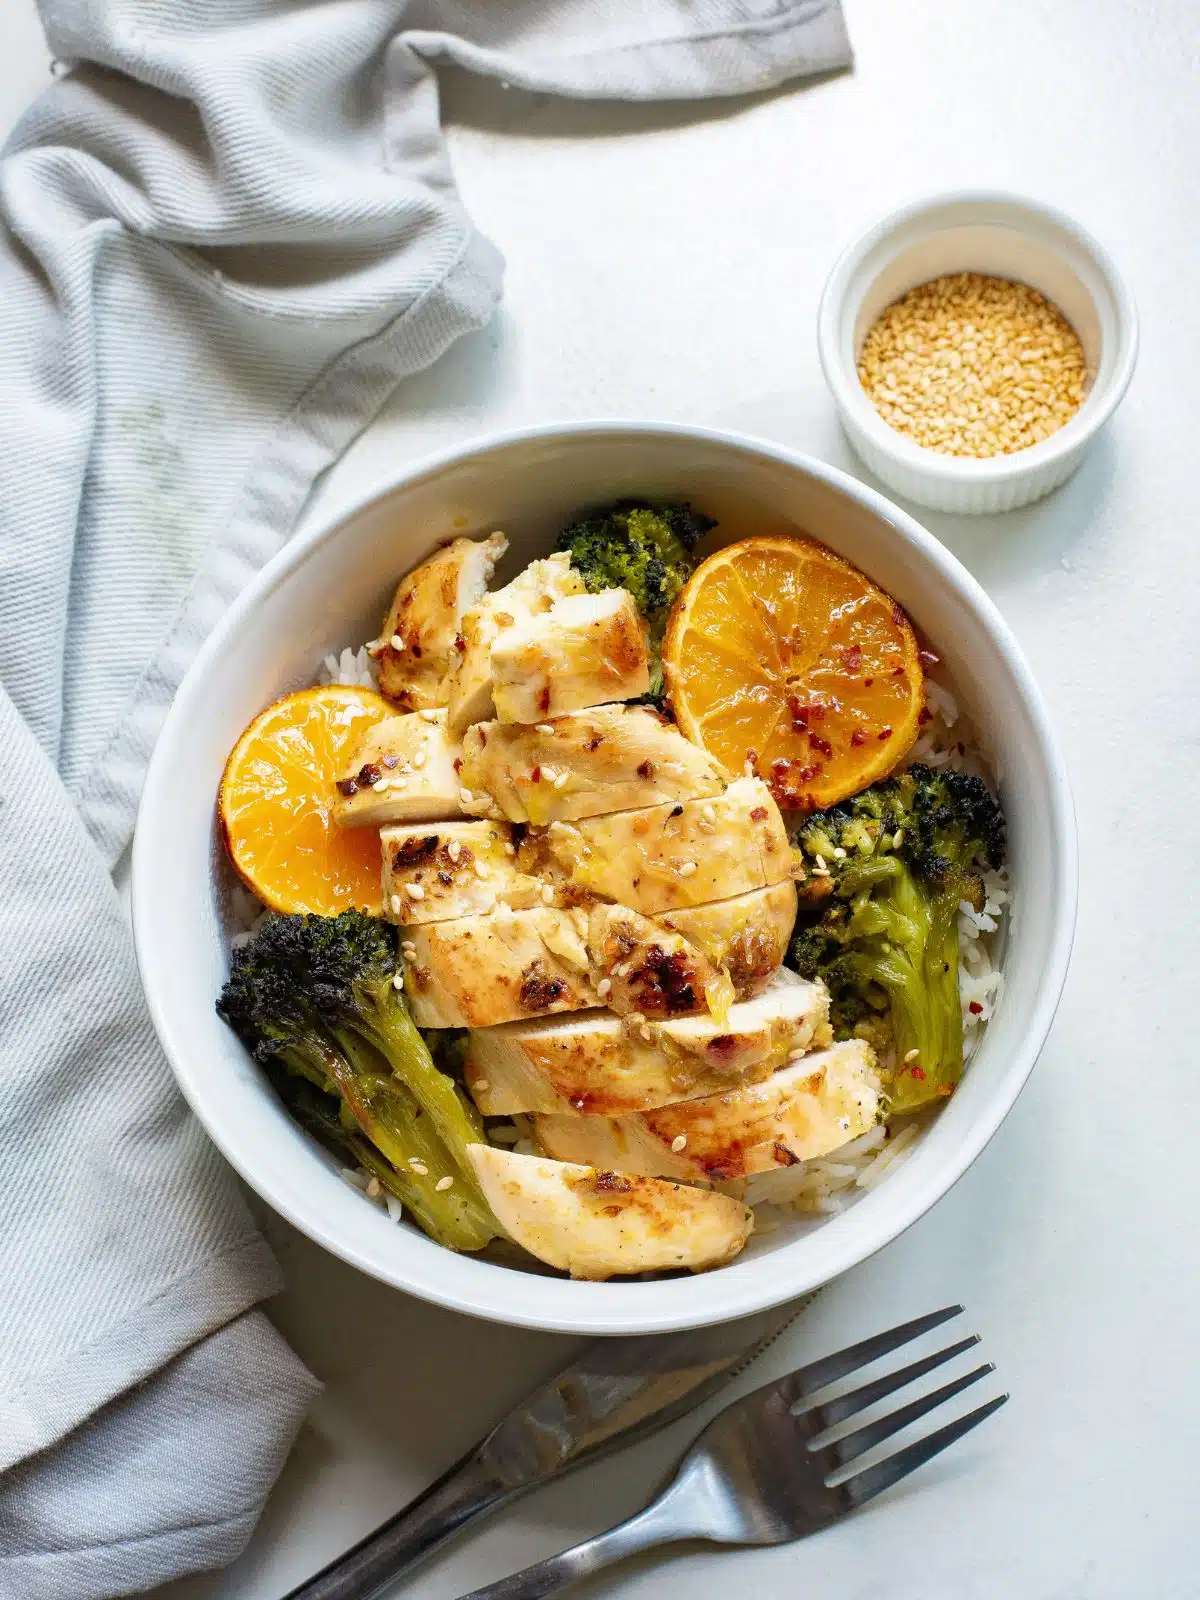 Sliced chicken cutlet, broccoli, and orange sliced served over rice in a white bowl.